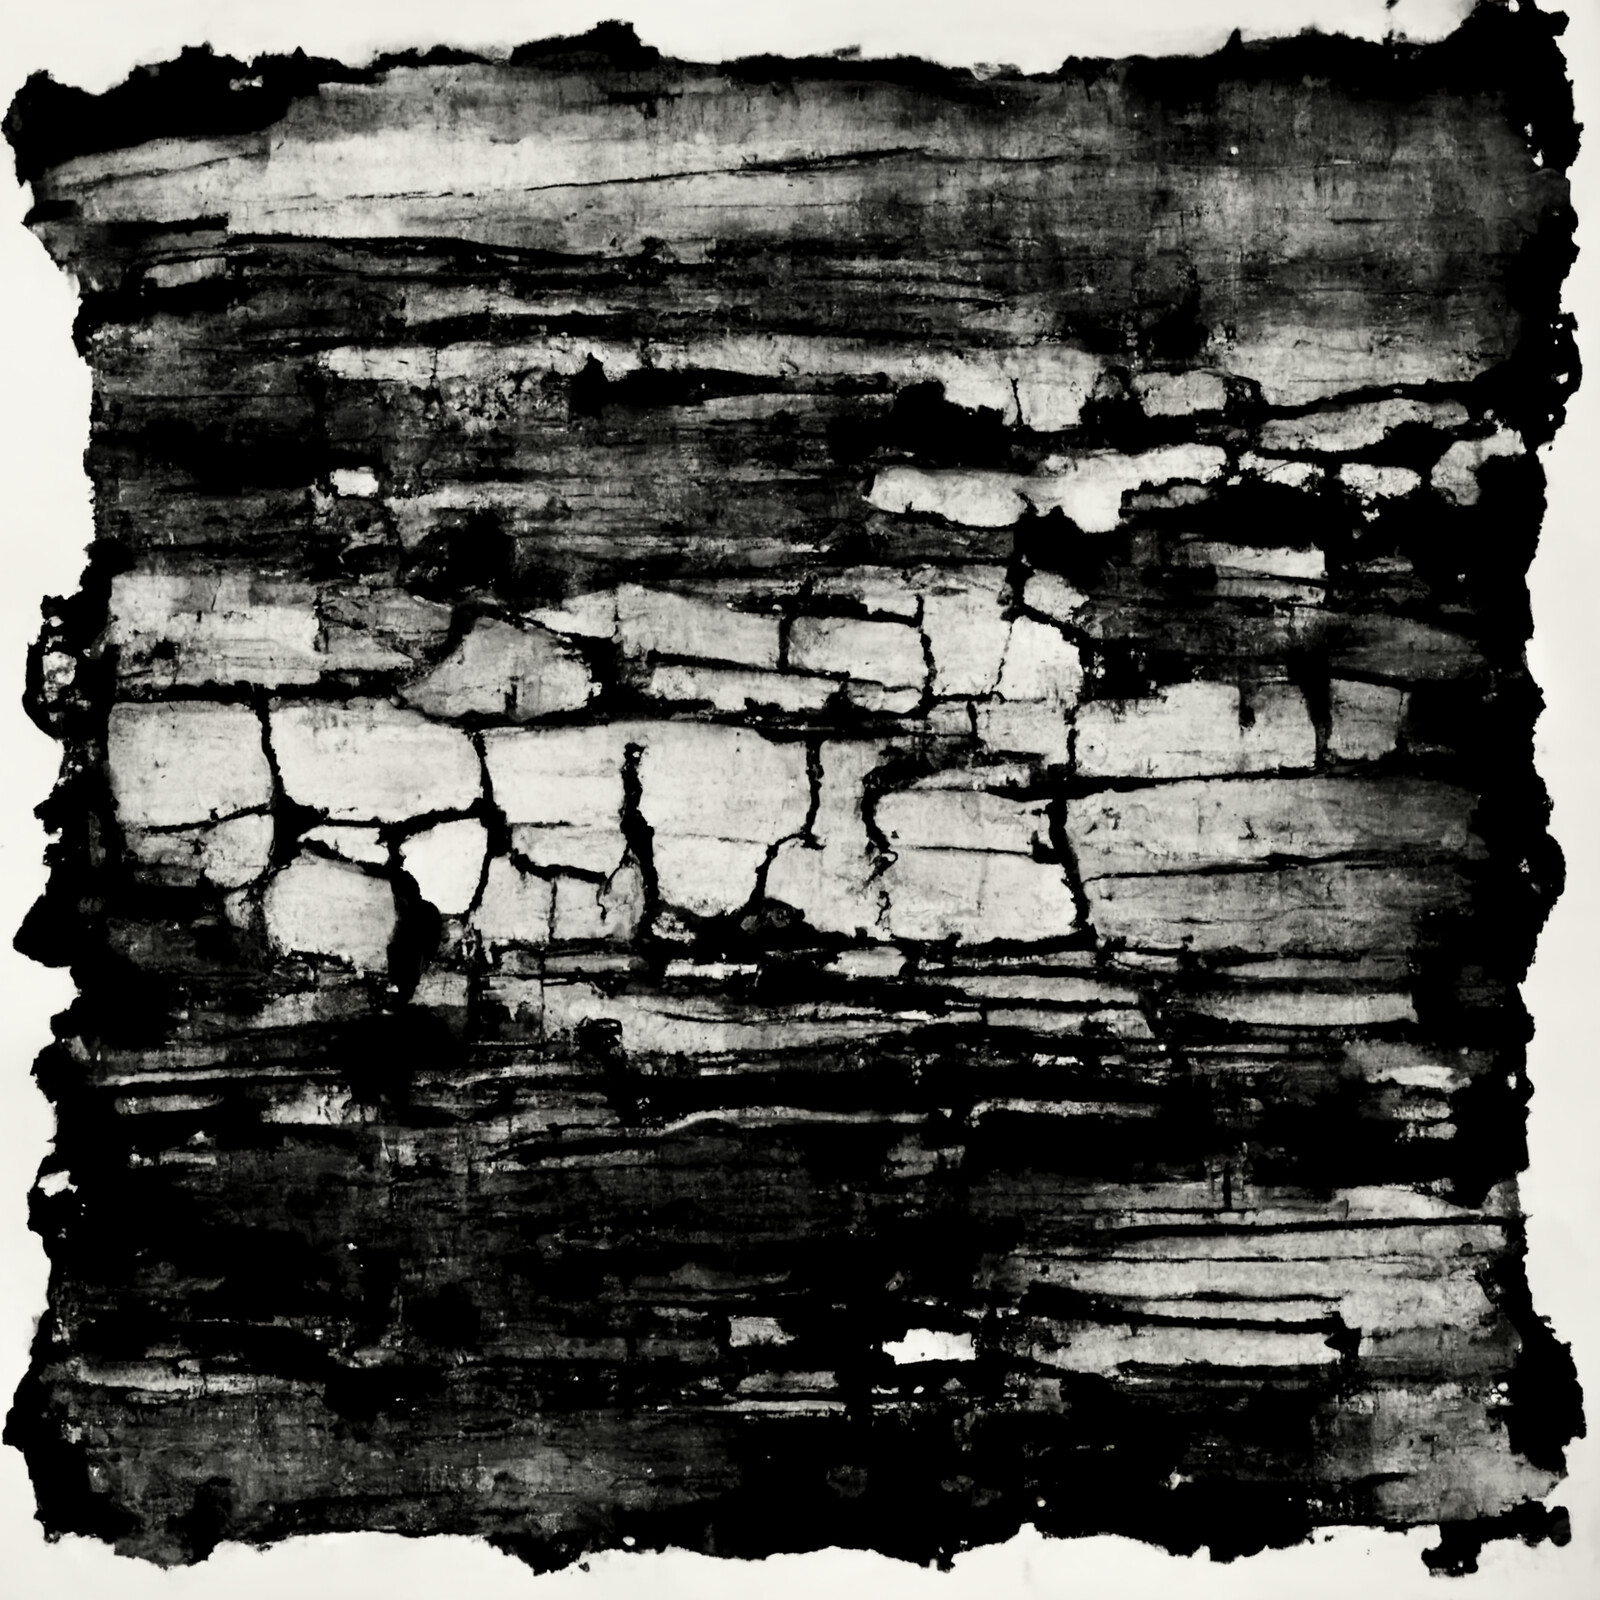 Grunge map creation test - raw outputs. Editing would be required to make tileable. (Prompt: "old grungey worn surface, black and white" )